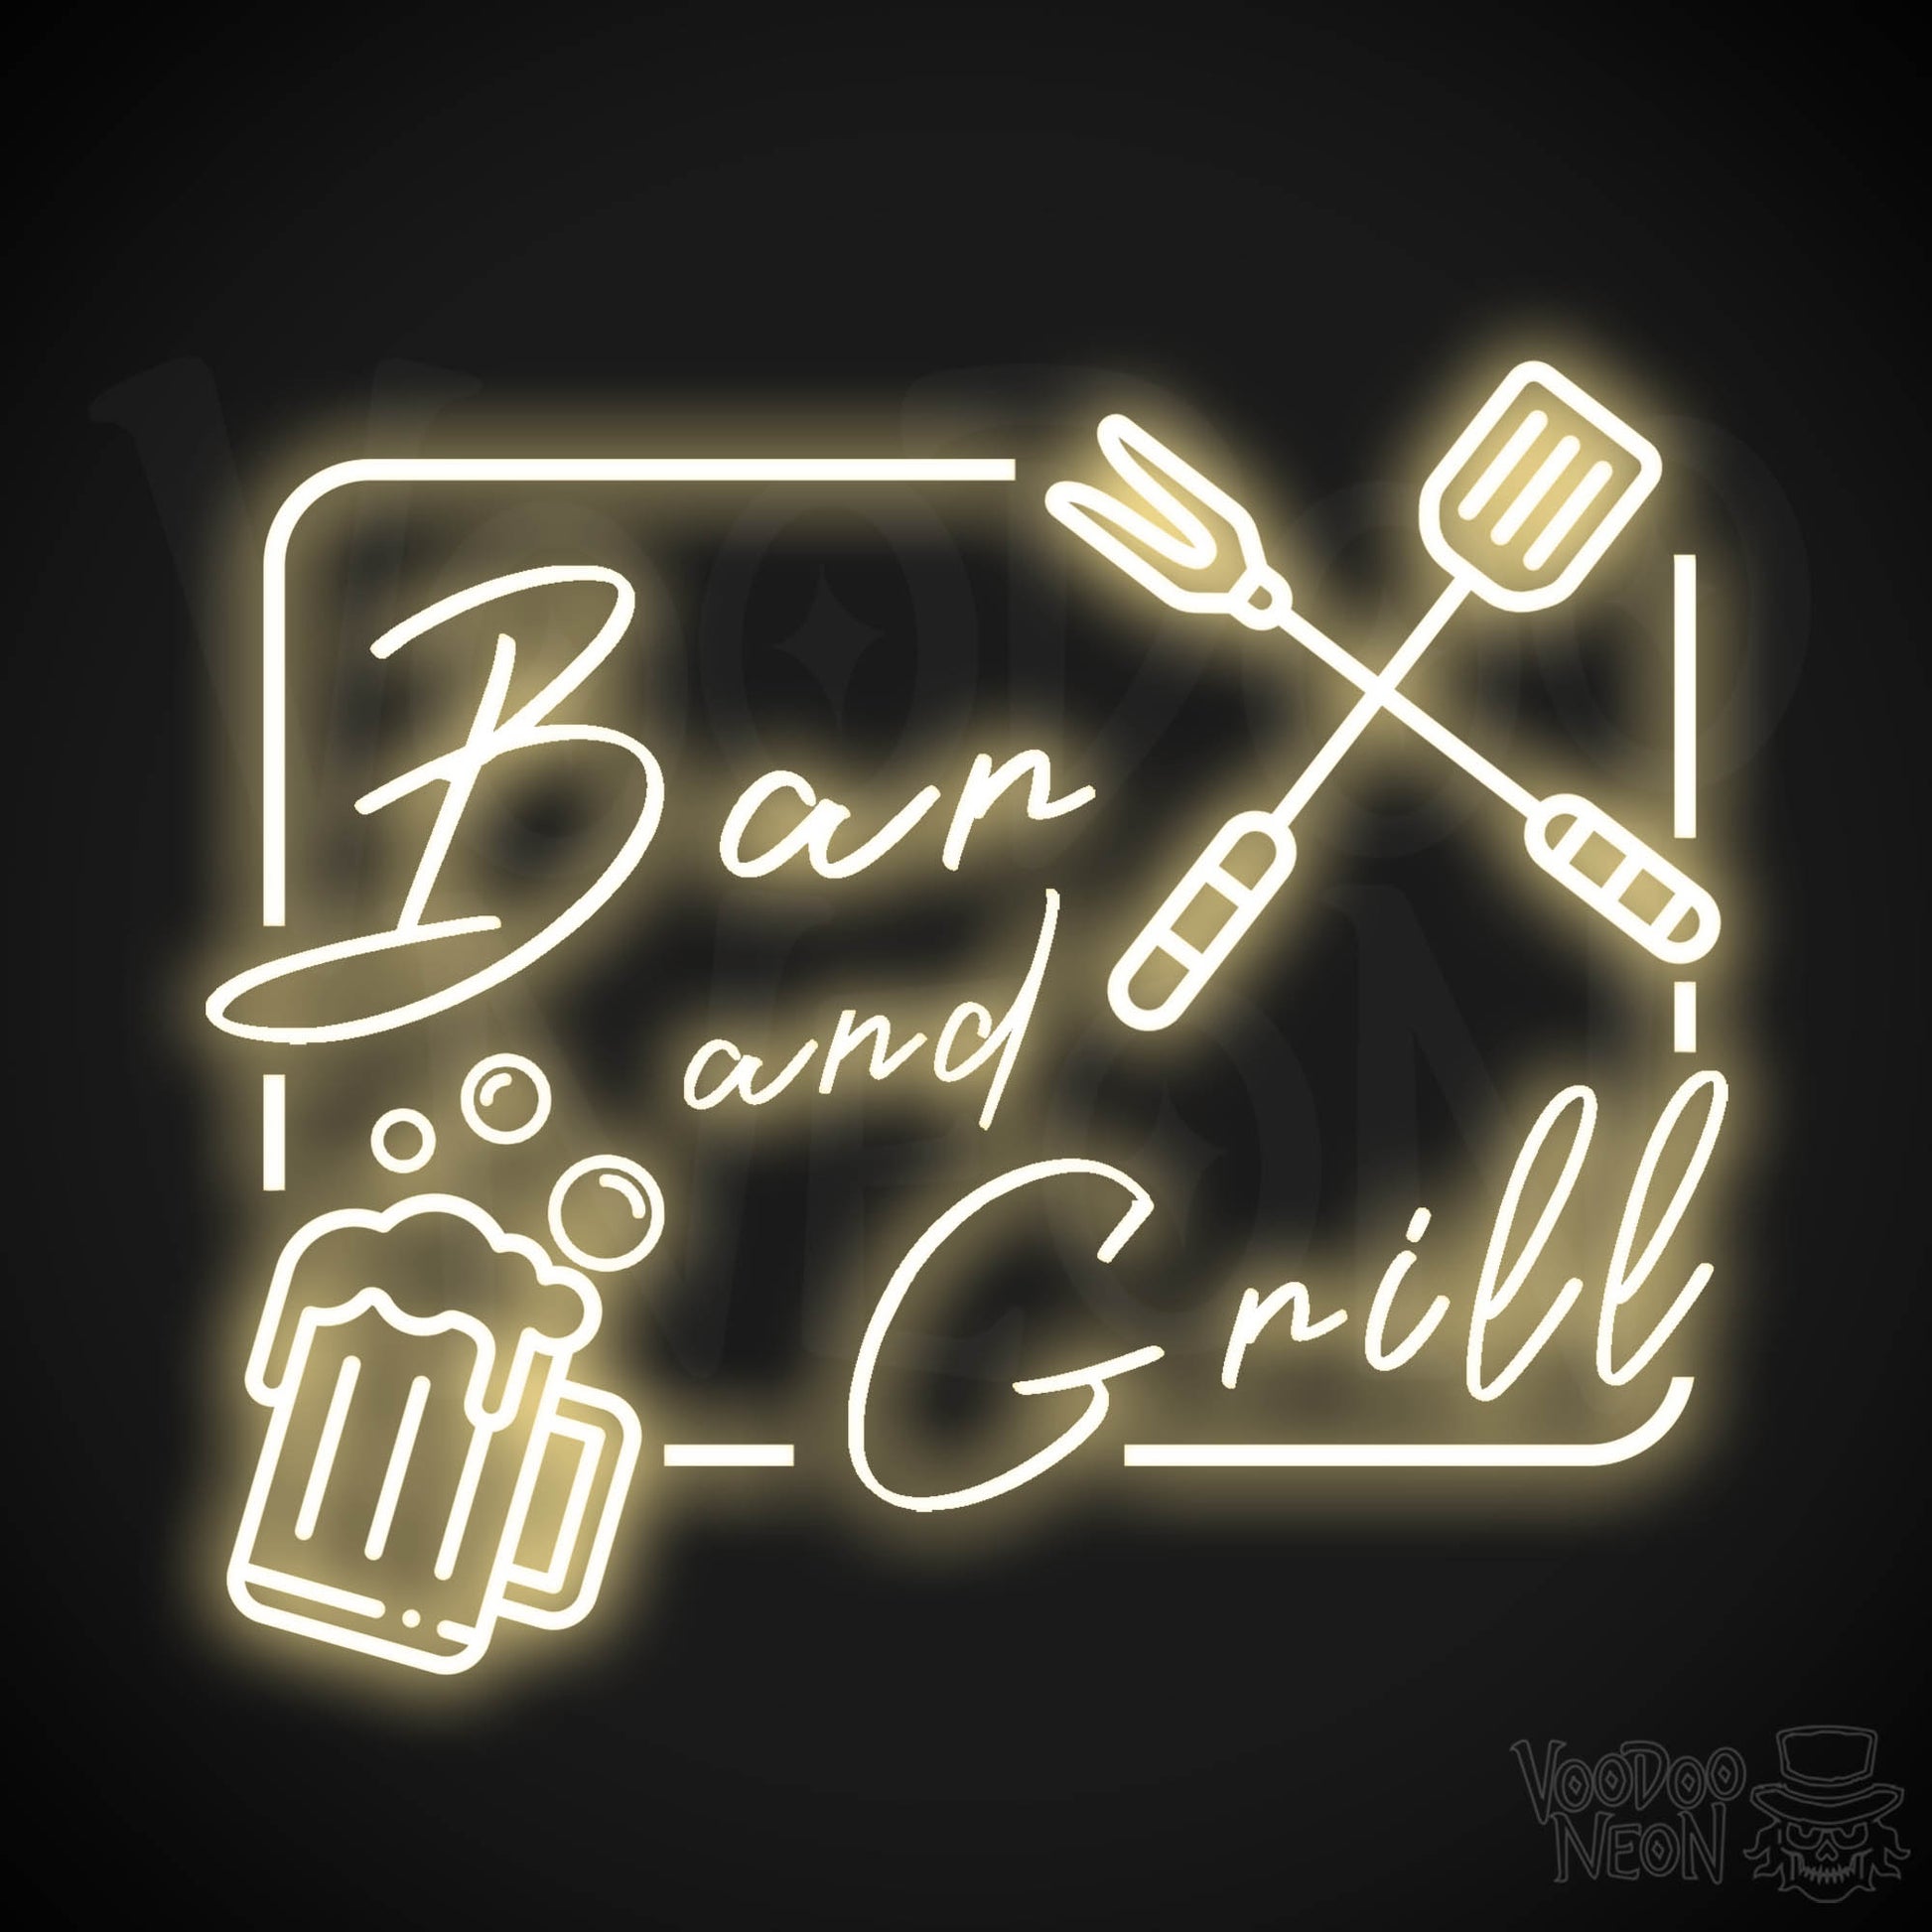 Bar & Grill Neon Sign - Neon Bar & Grill Sign - LED Signs - Color Warm White